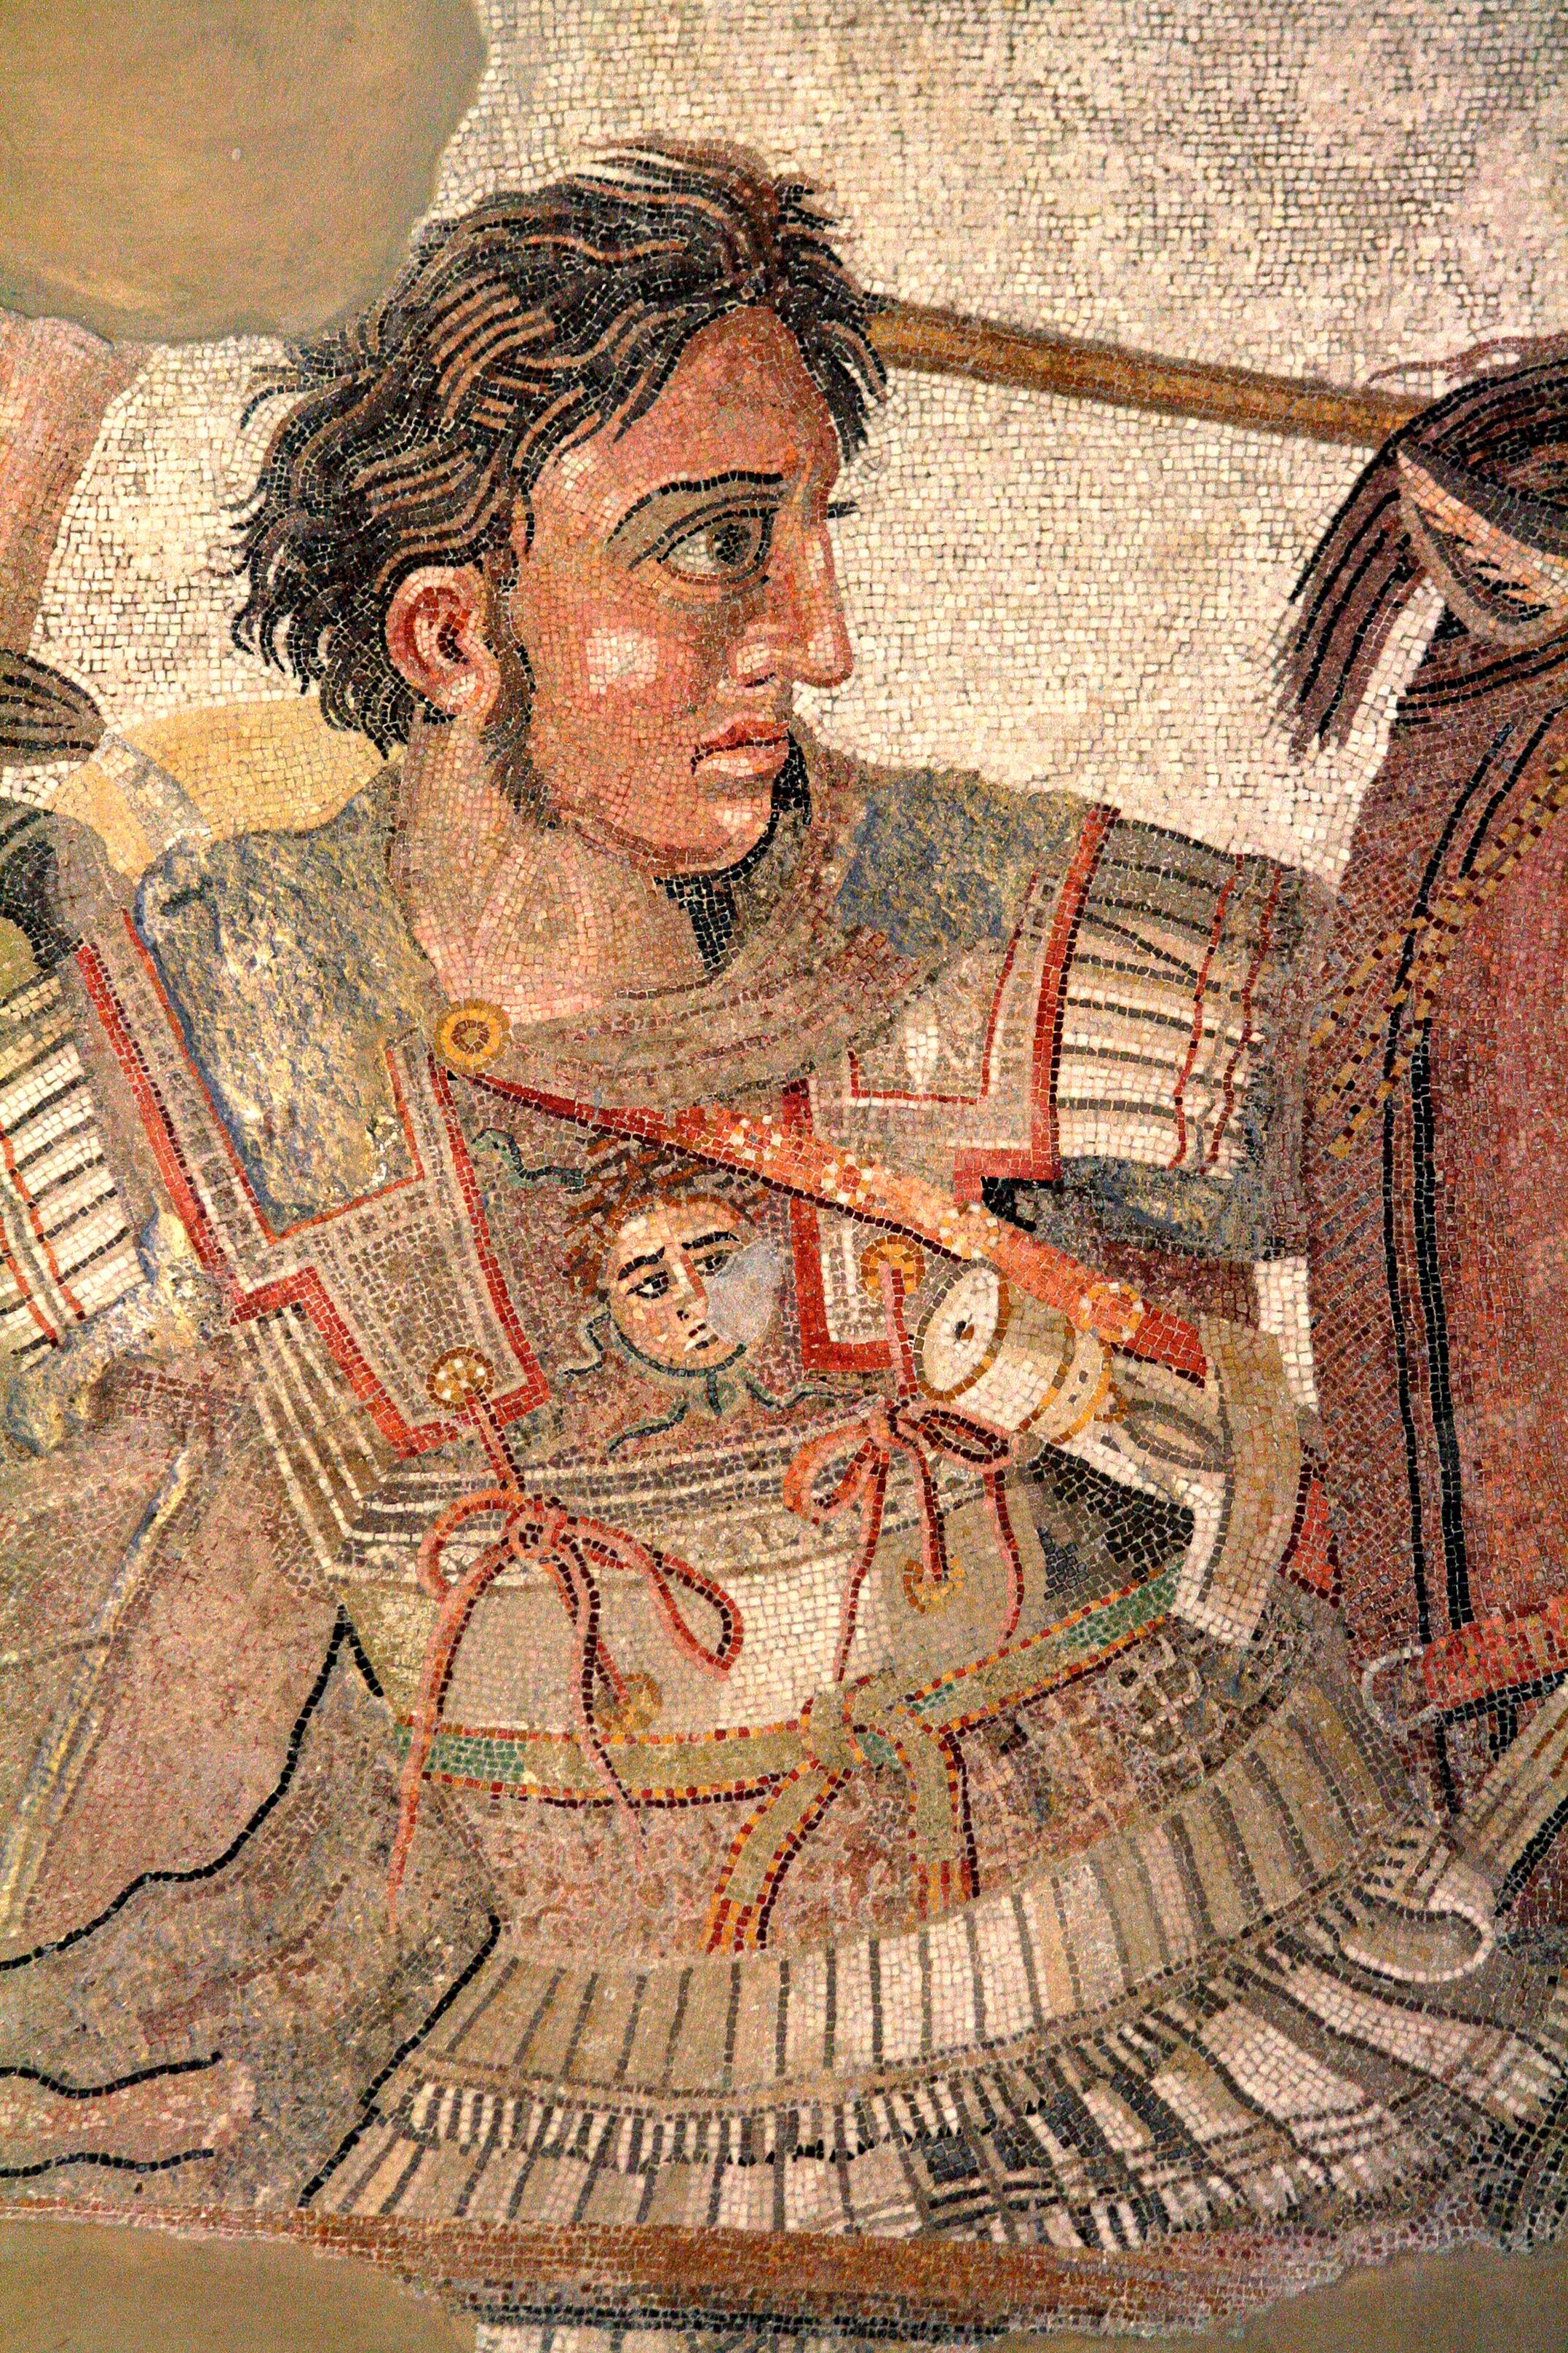 How did Alexander facilitate Cultural Exchange within the Ancient World?